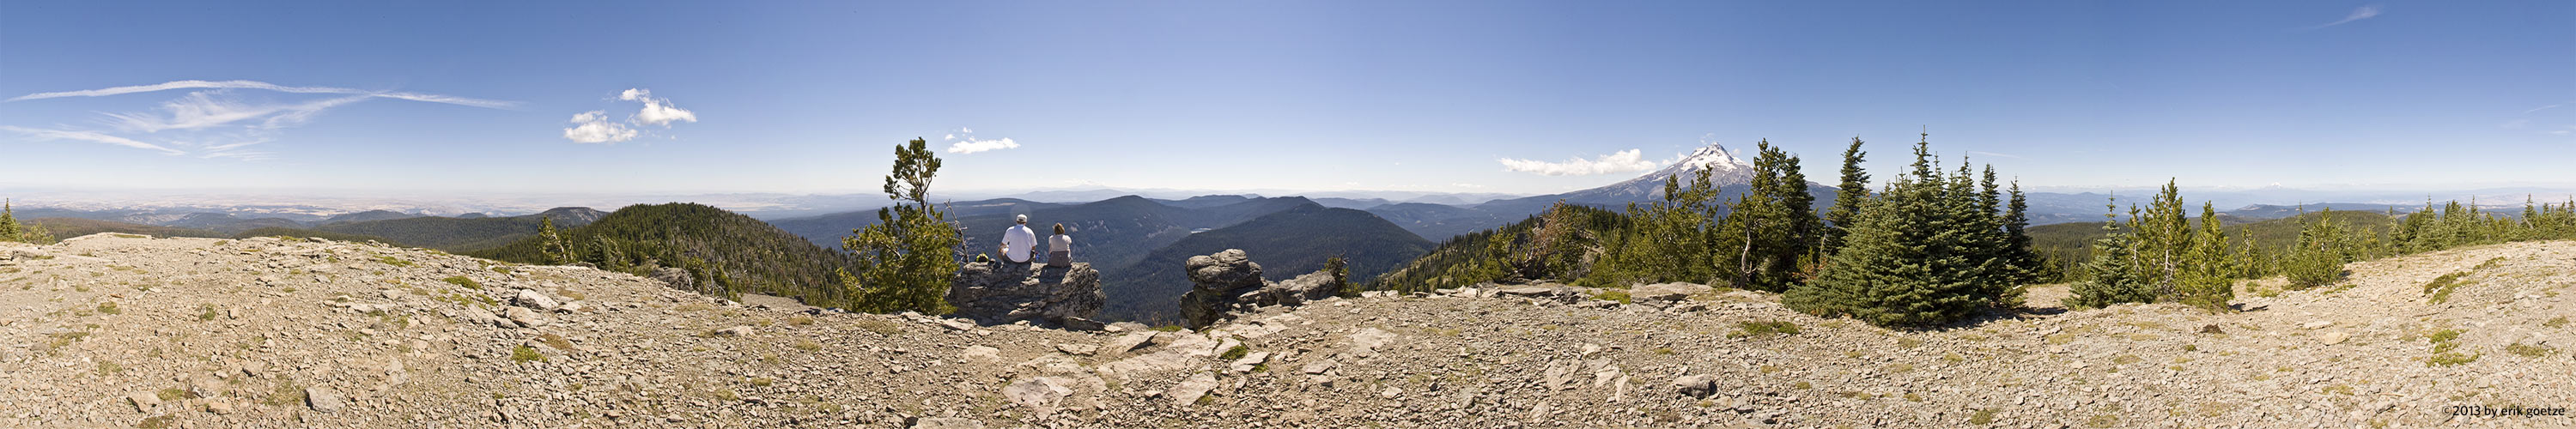 This 360 panorama is from near Mt. Hood, Oregon